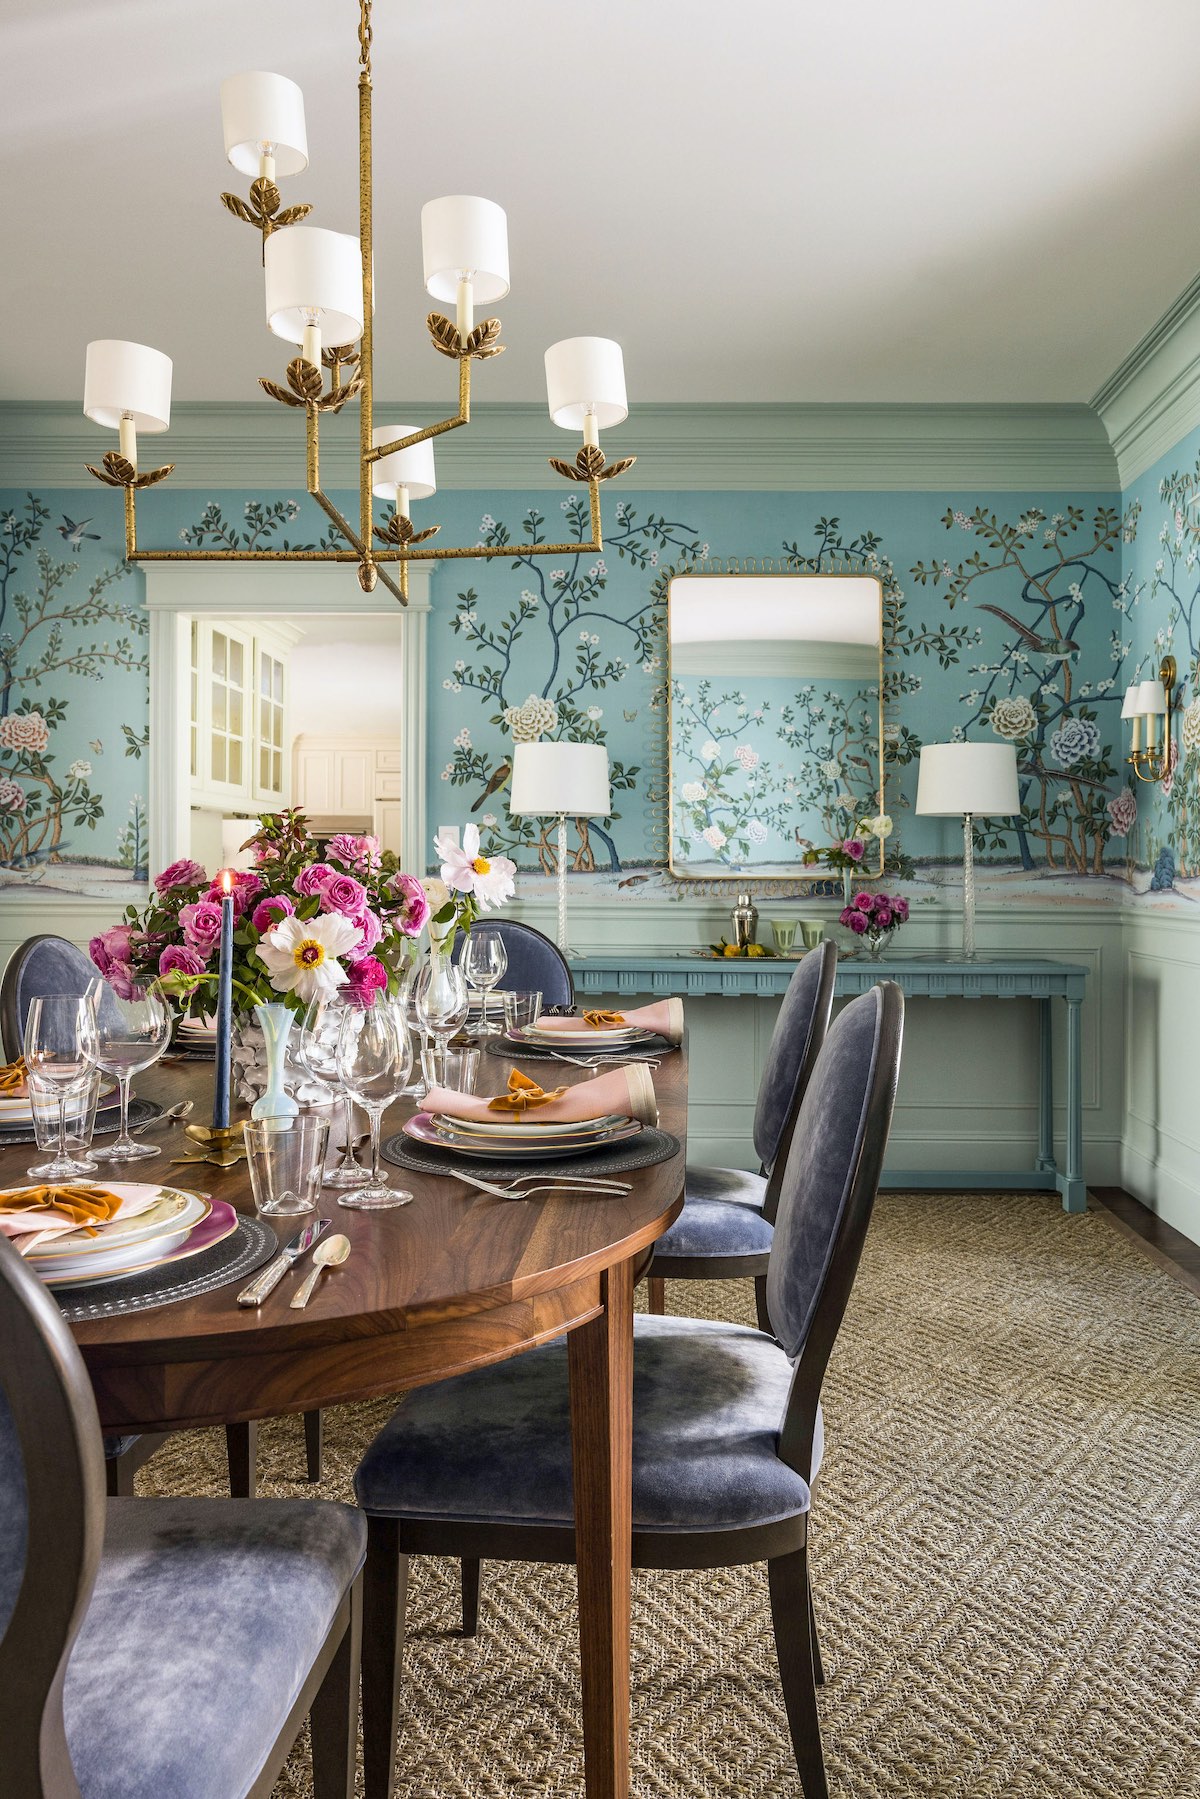 Teal chinoiserie wallpaper wraps around a dining room with grey velvet chairs and pink flowers on the table.